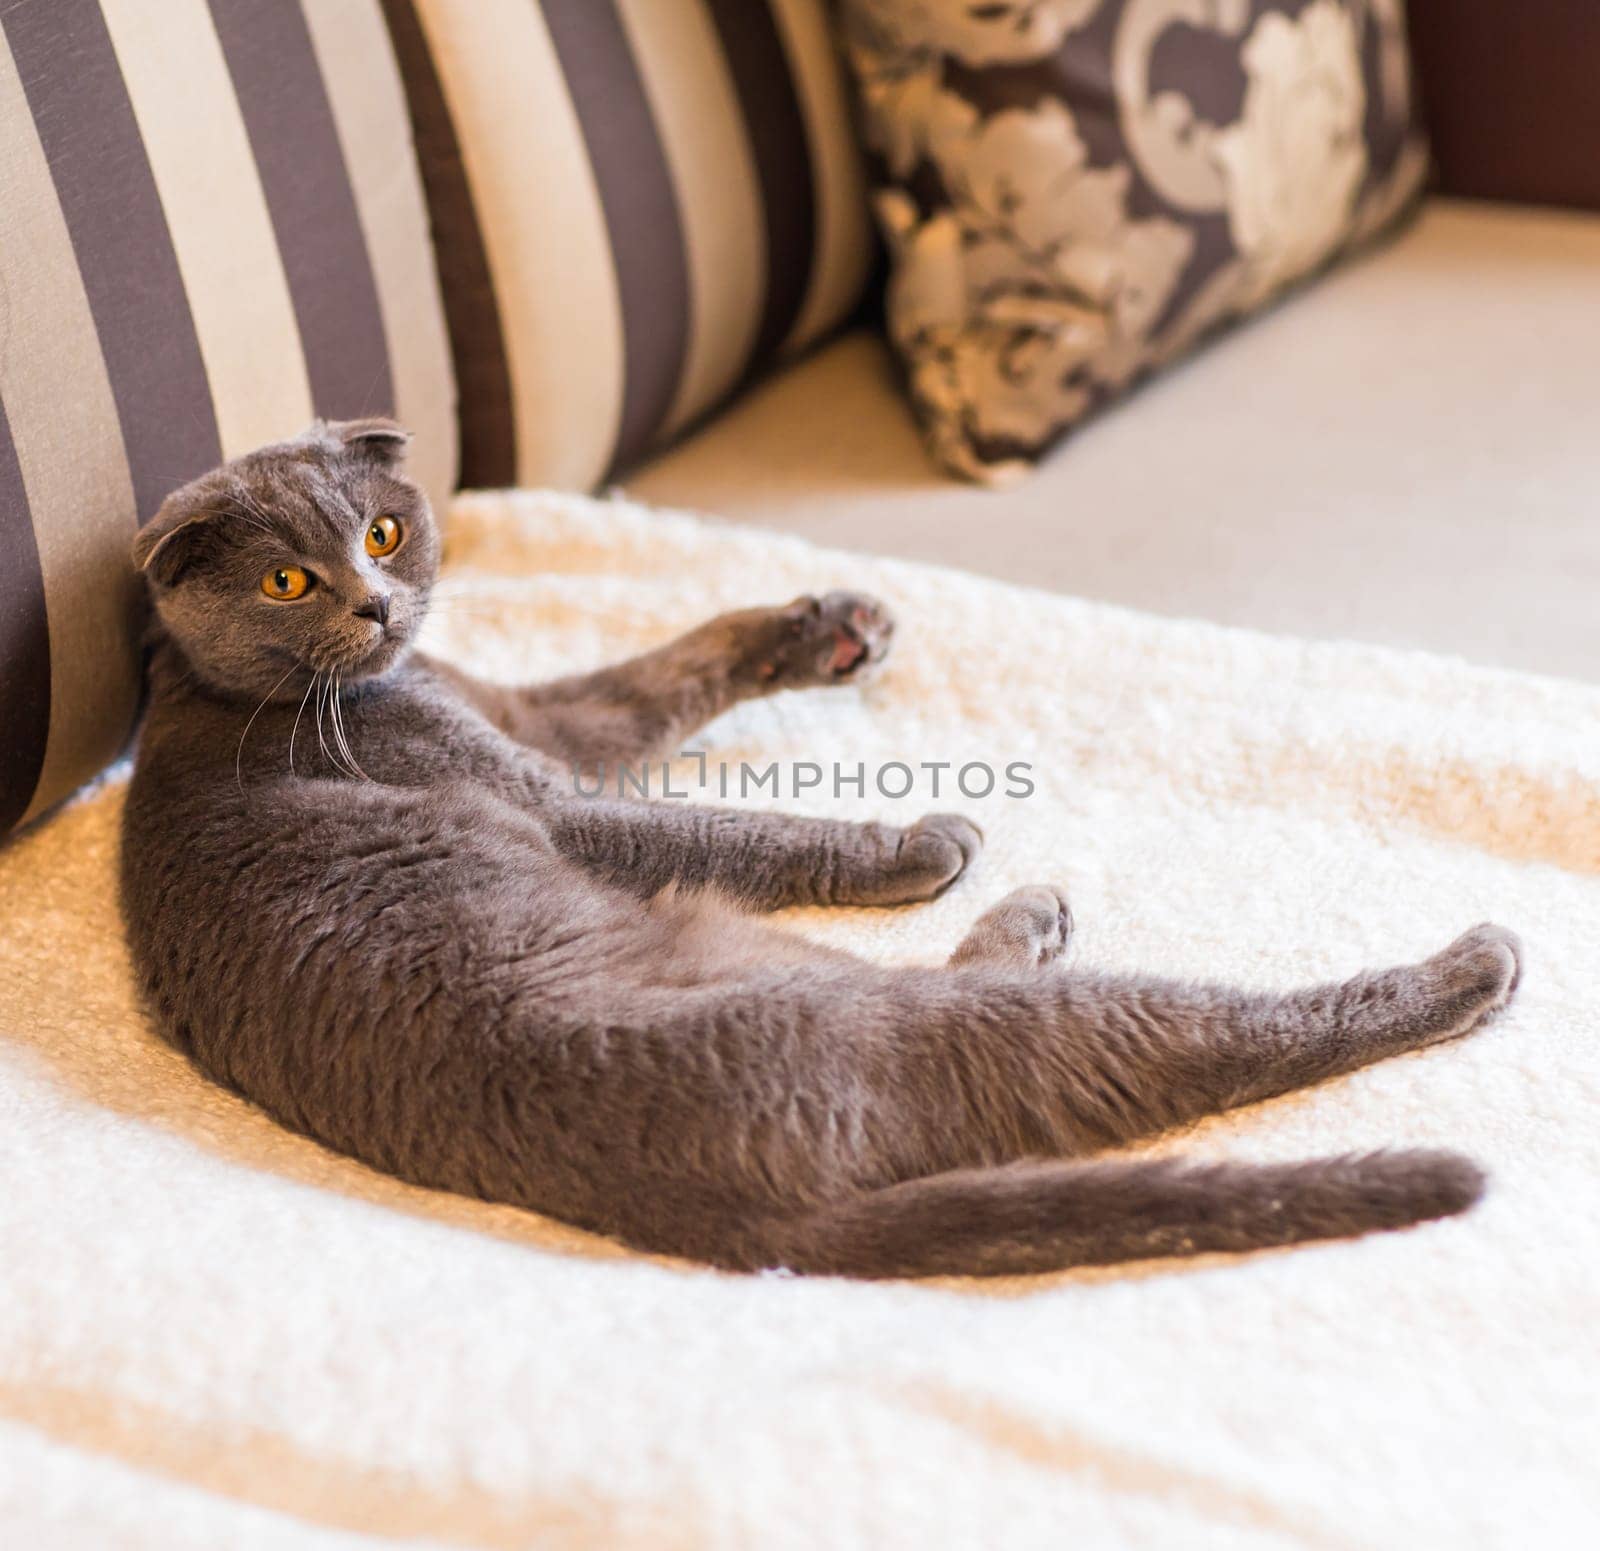 Cat relaxing on the couch in colorful blur background, cute funny cat close up, elaxing cat, cat resting, cat playing at home